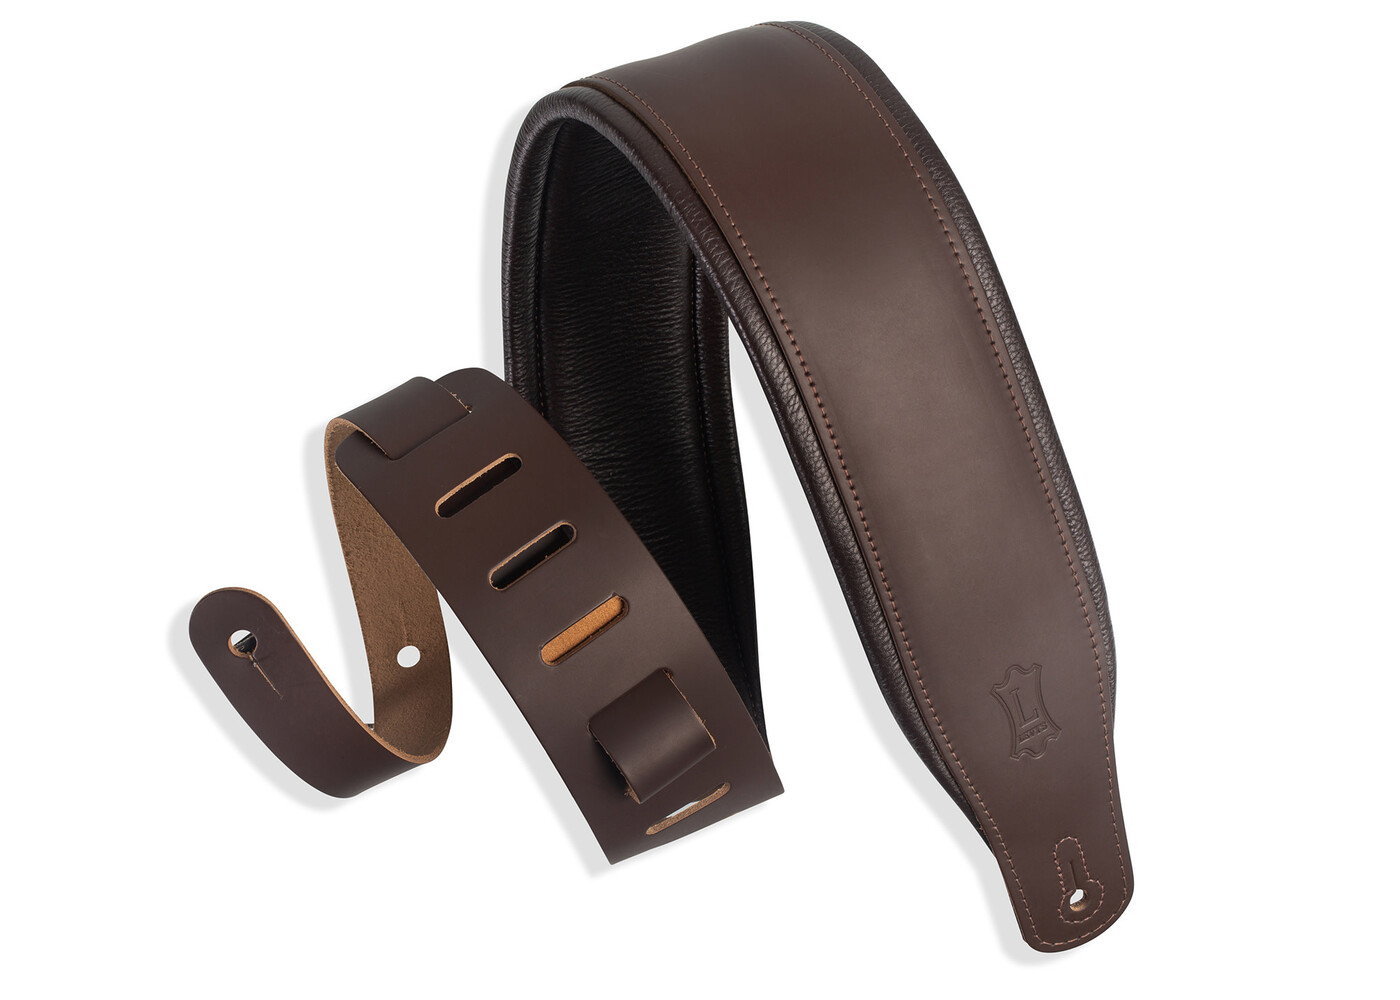 Levy's Levy's Classic Series Dark Brown Leather Guitar Strap